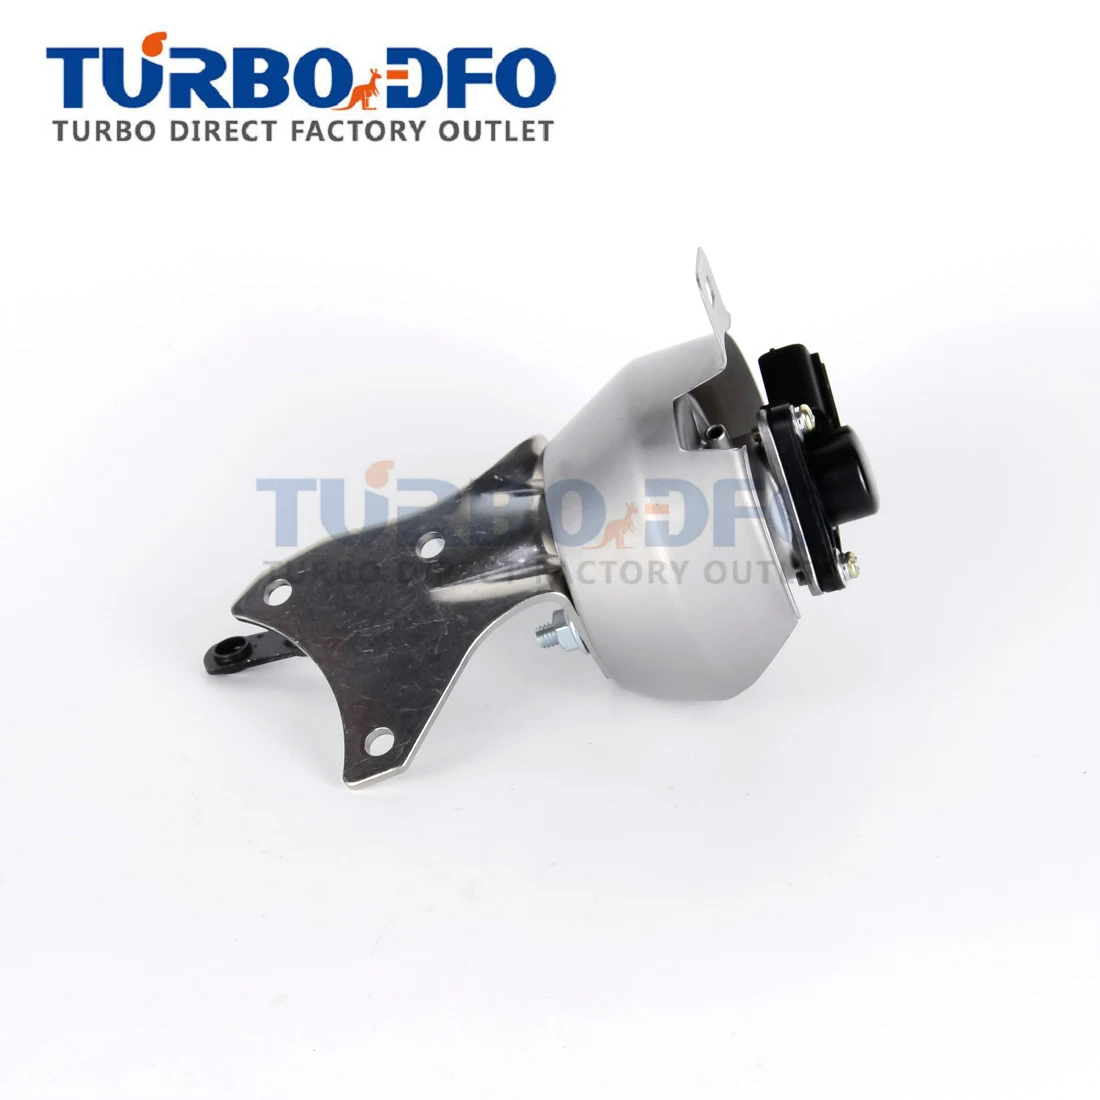 

Turbine Electronic Actuator 9645919580 756047-5004S for Peugeot 307 407 308 508 607 2.0 HDi 136HP 100Kw DW10BTED4 2004-